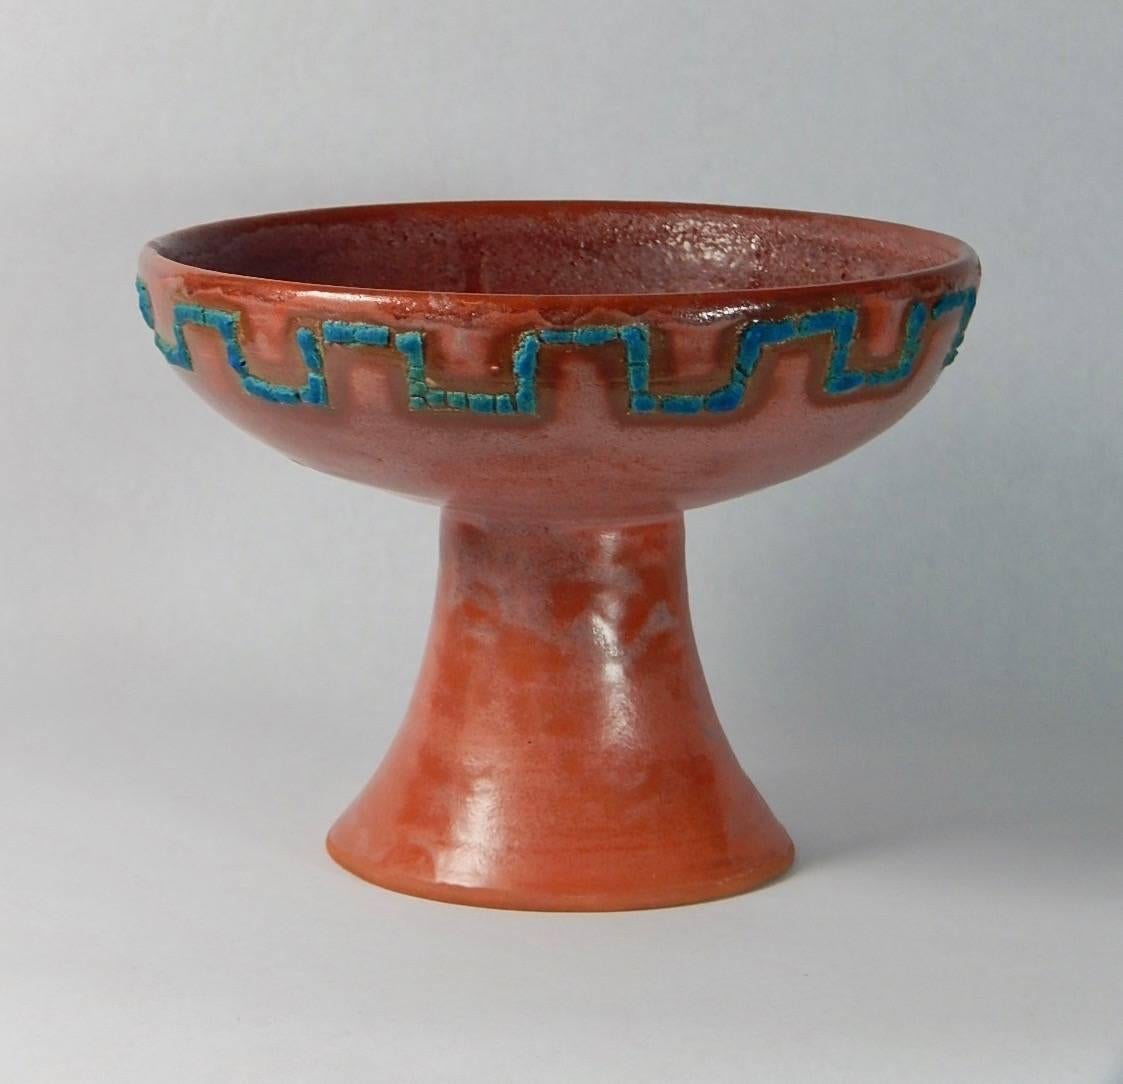  Relicware wheel thrown earthenware footed bowl by Andrew Wilder # 64. In terra cotta with turquoise lichen glaze and terra cotta colored overglaze . Made by hand in Los Angeles, California 2017.  We can produce commissions to order in this series.